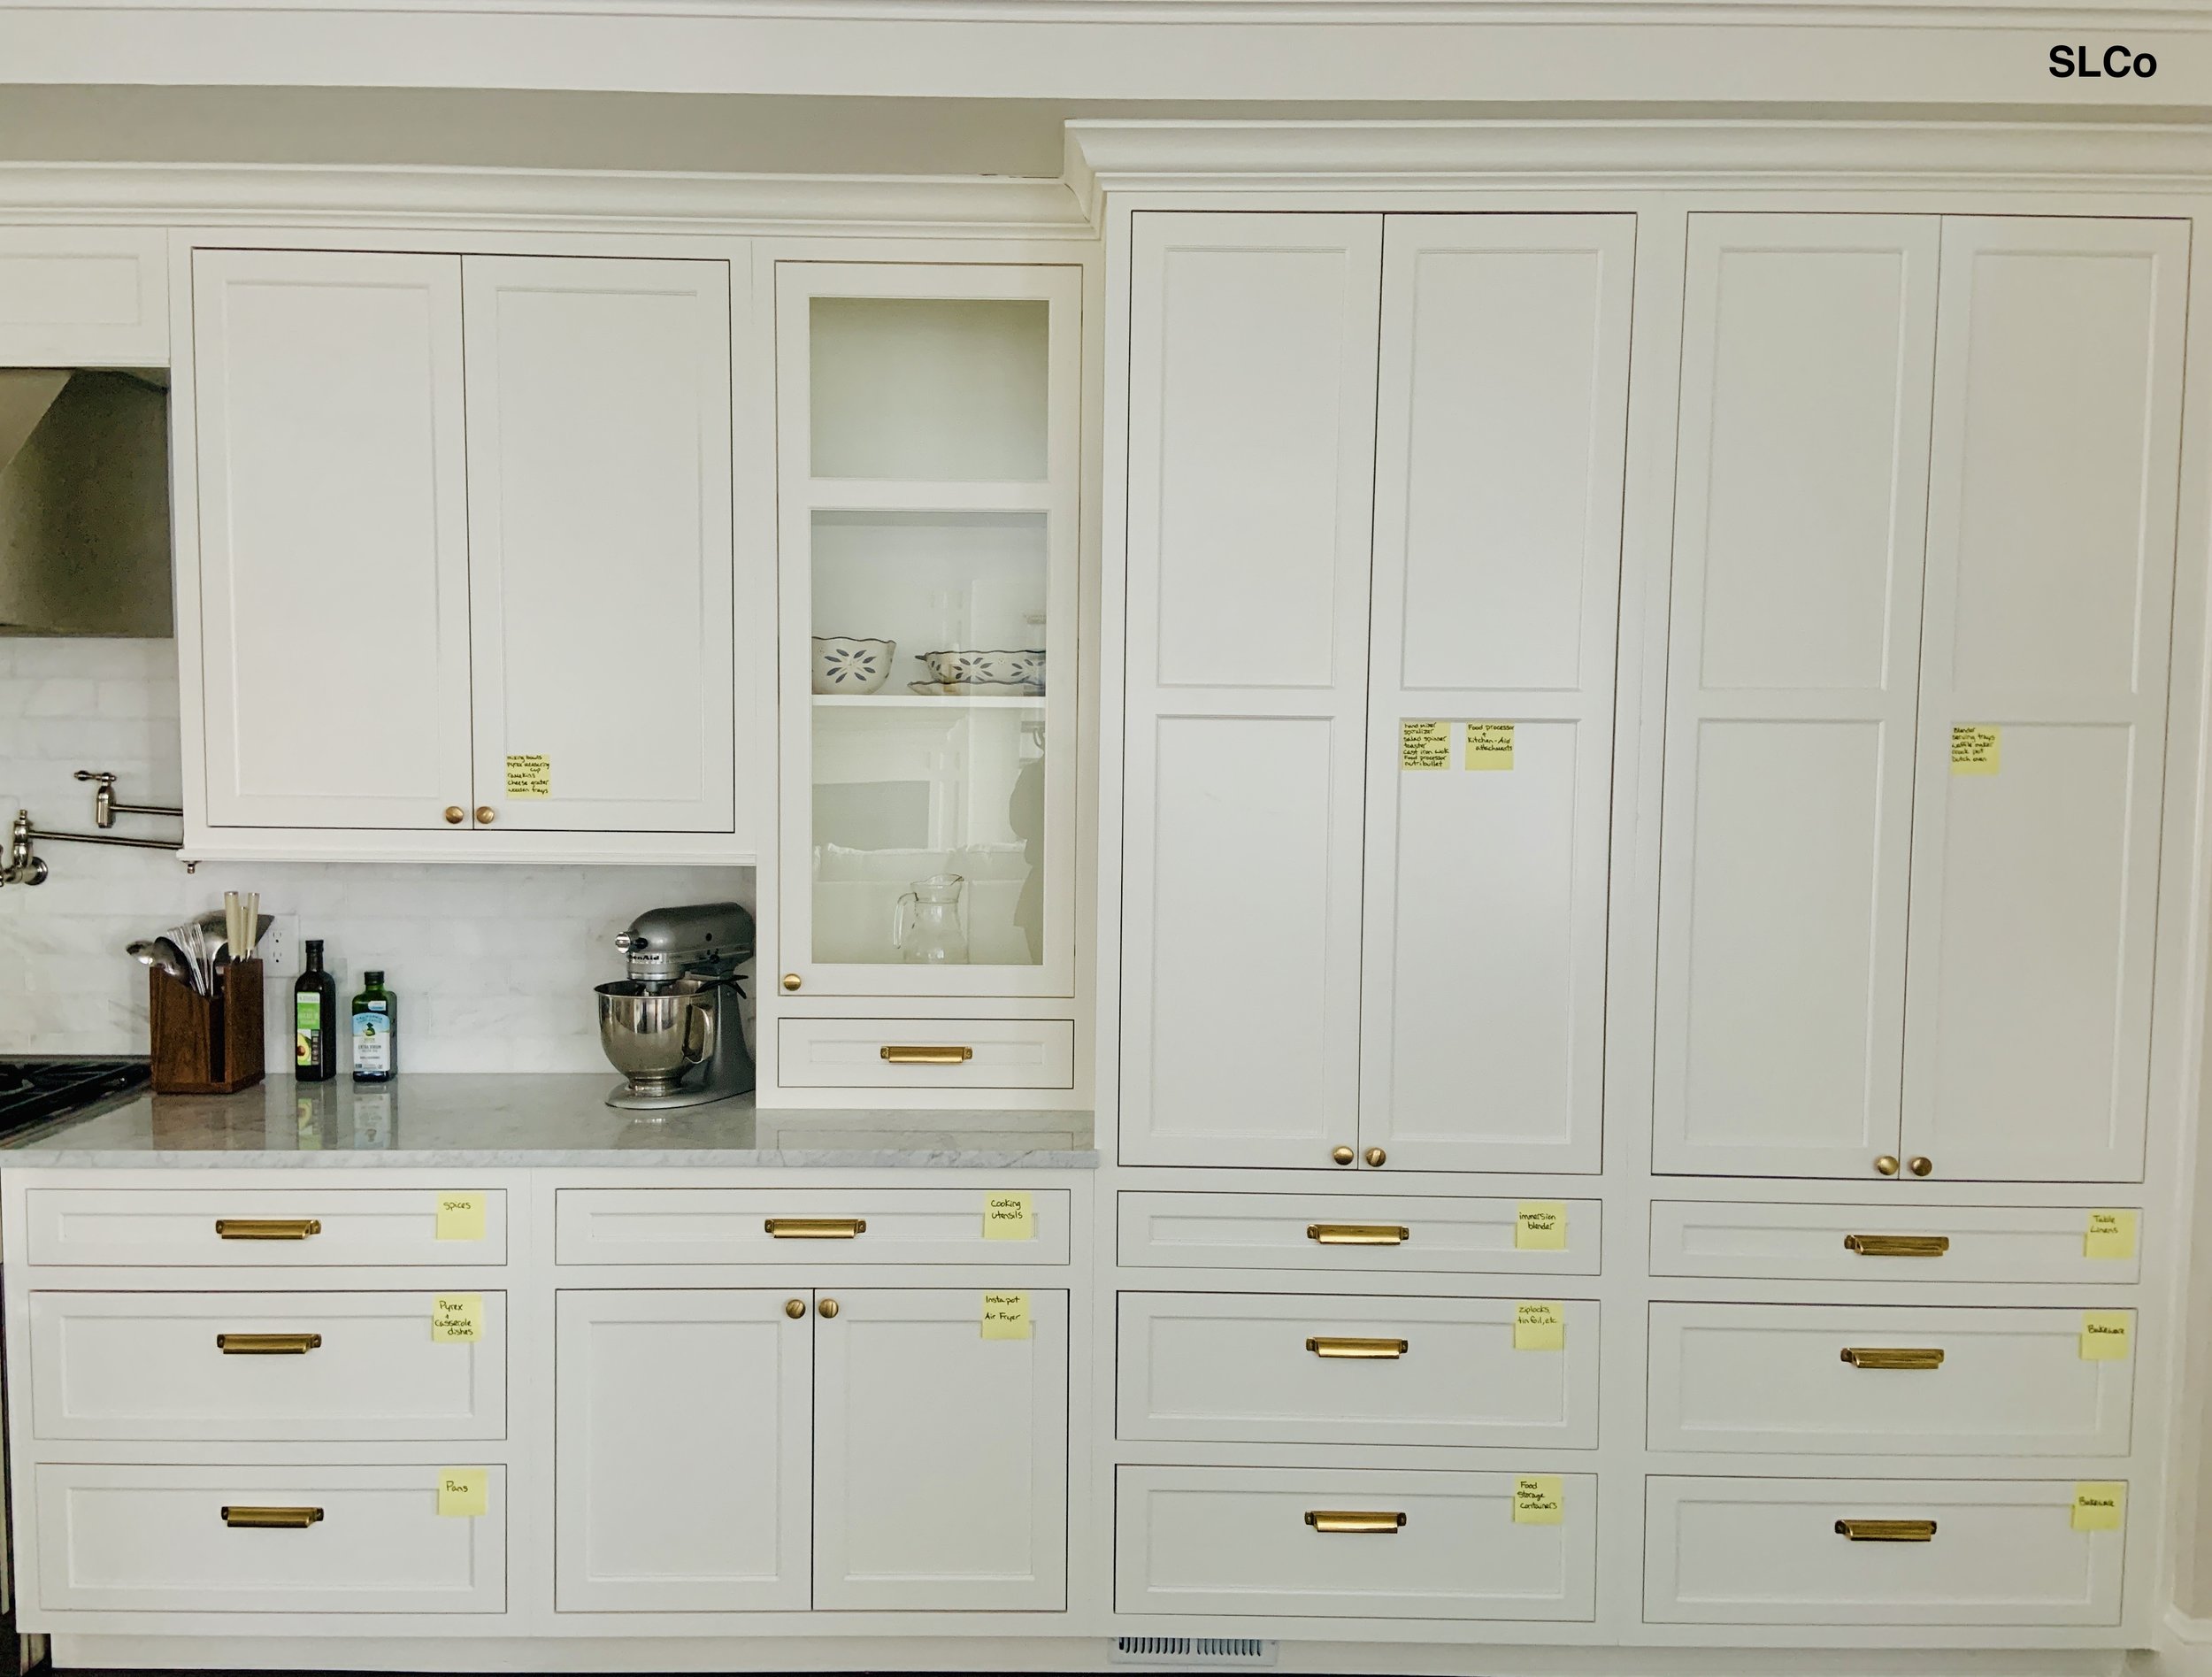 Larger overview photo of kitchen with white cabinets and granite counter with yellow post-it notes on the corners of all cabinets and drawers for labeling.